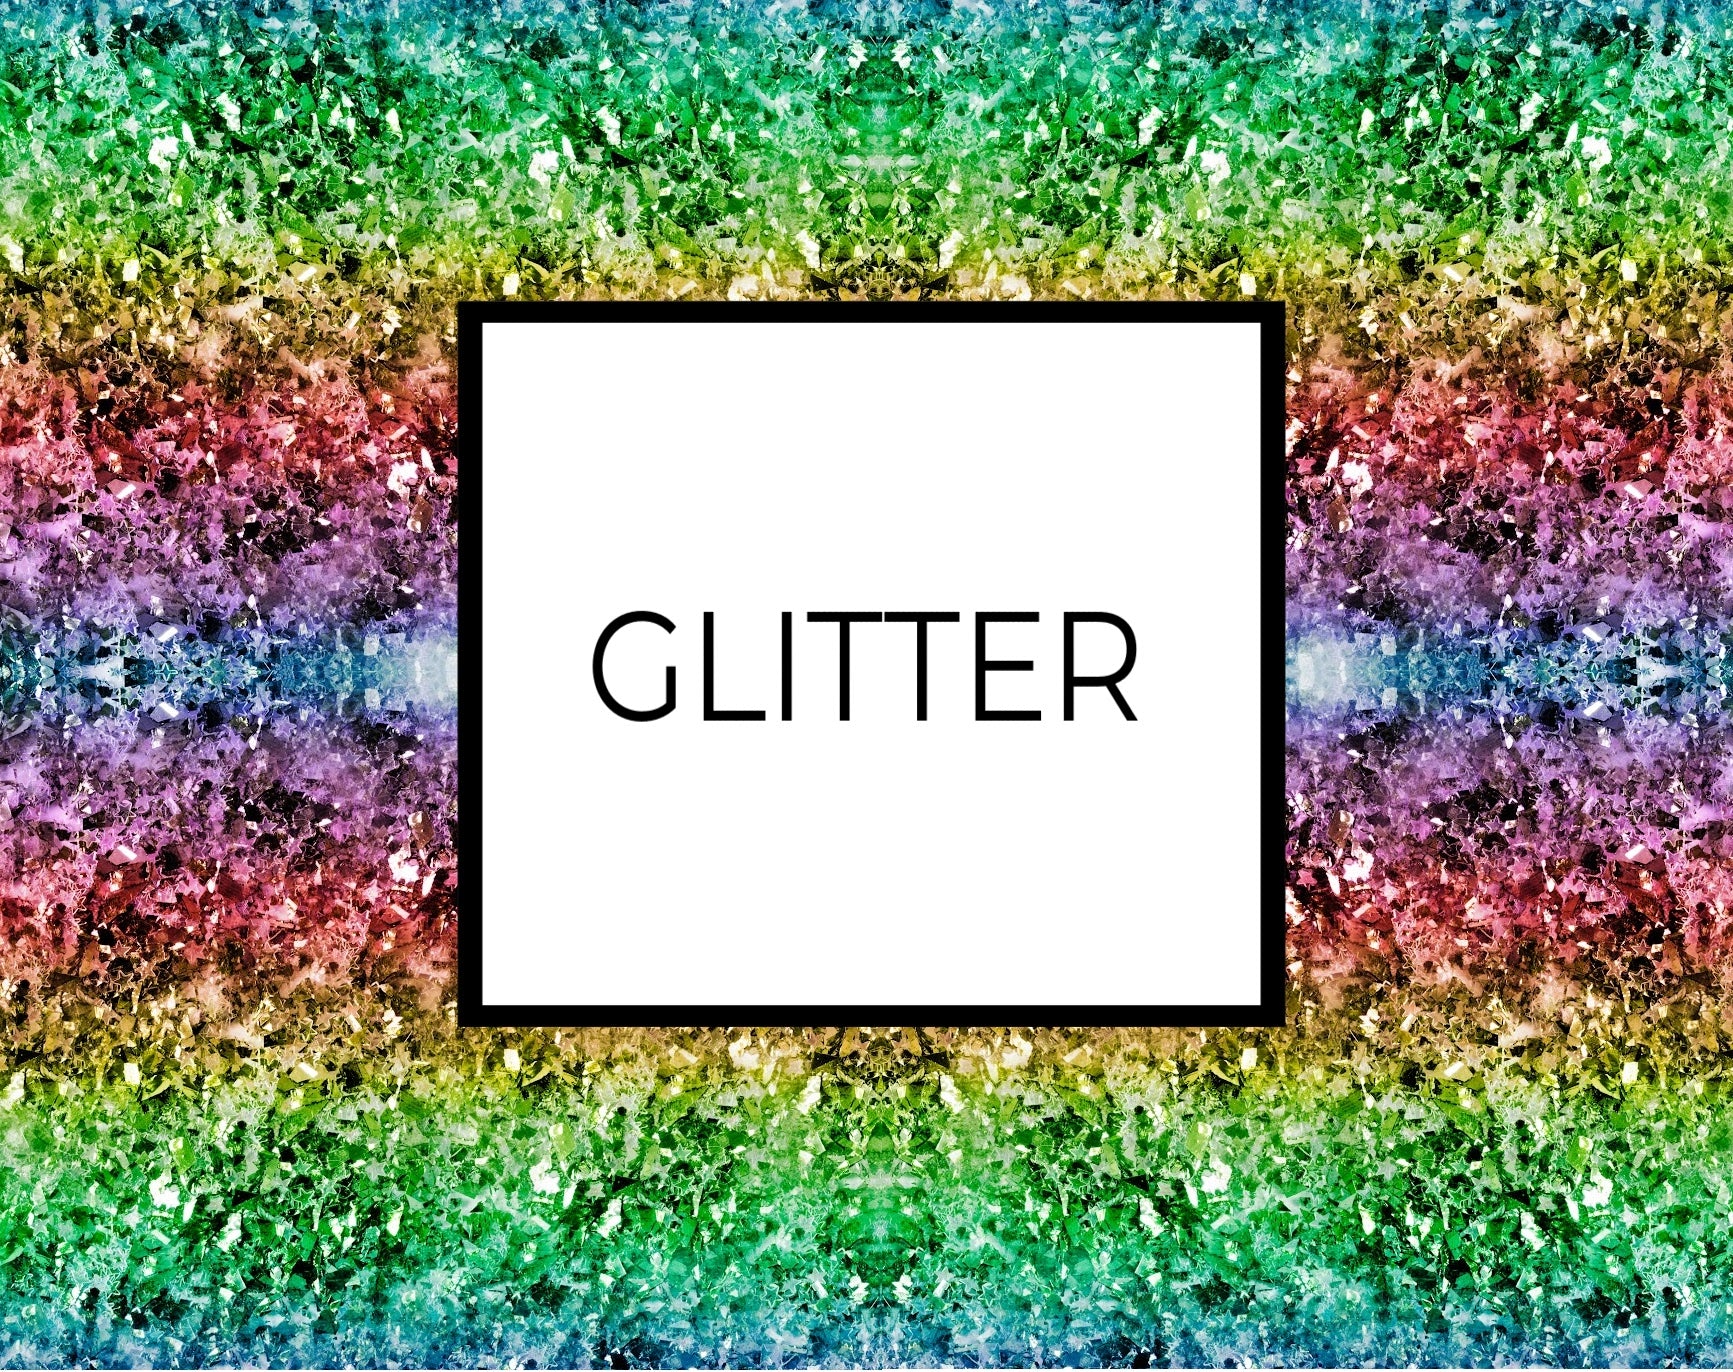 12x12 inch glitter acrylic sheets for